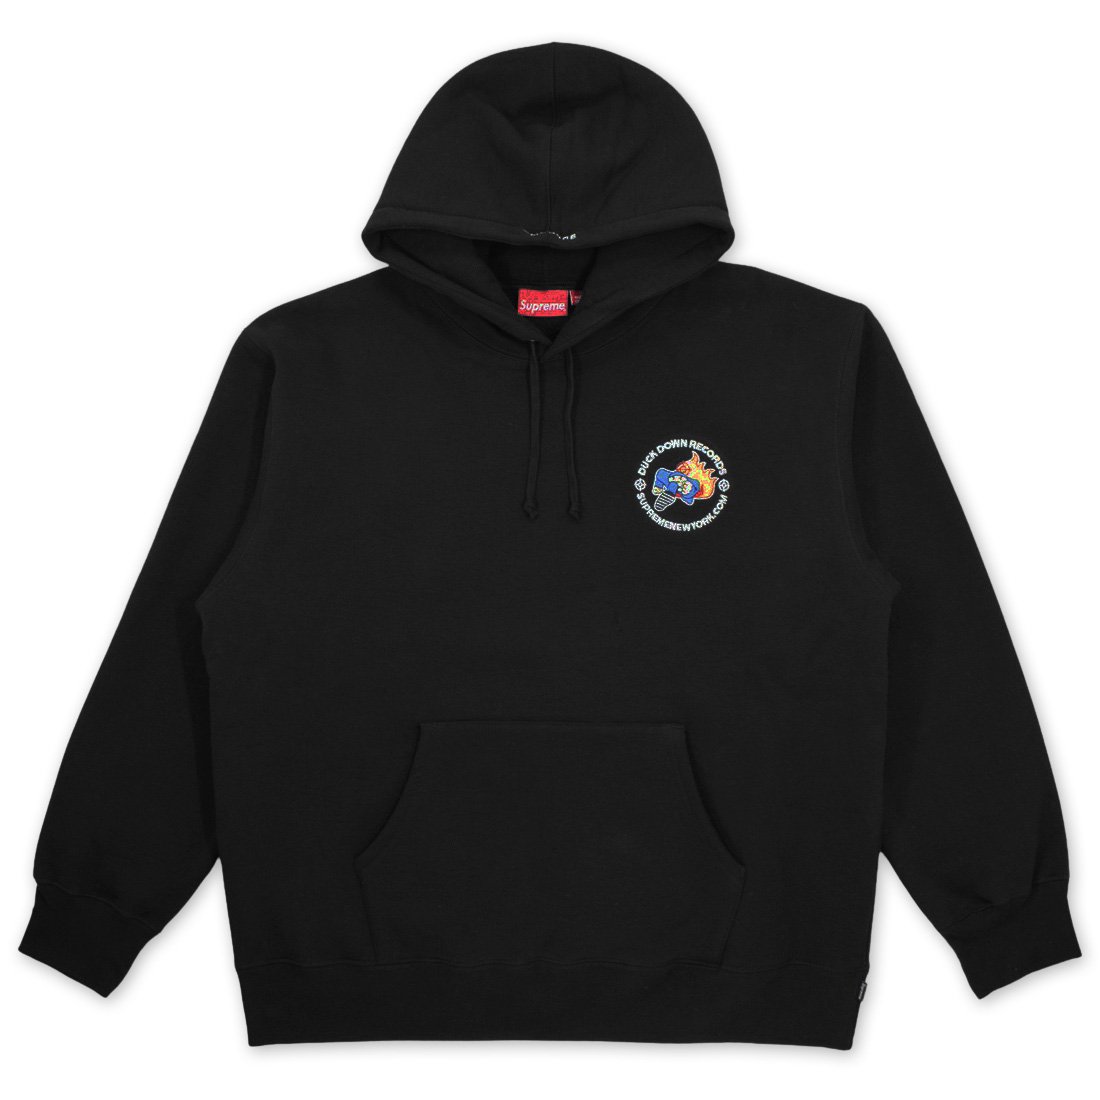 Supreme  Duck Down Redcords Hooded